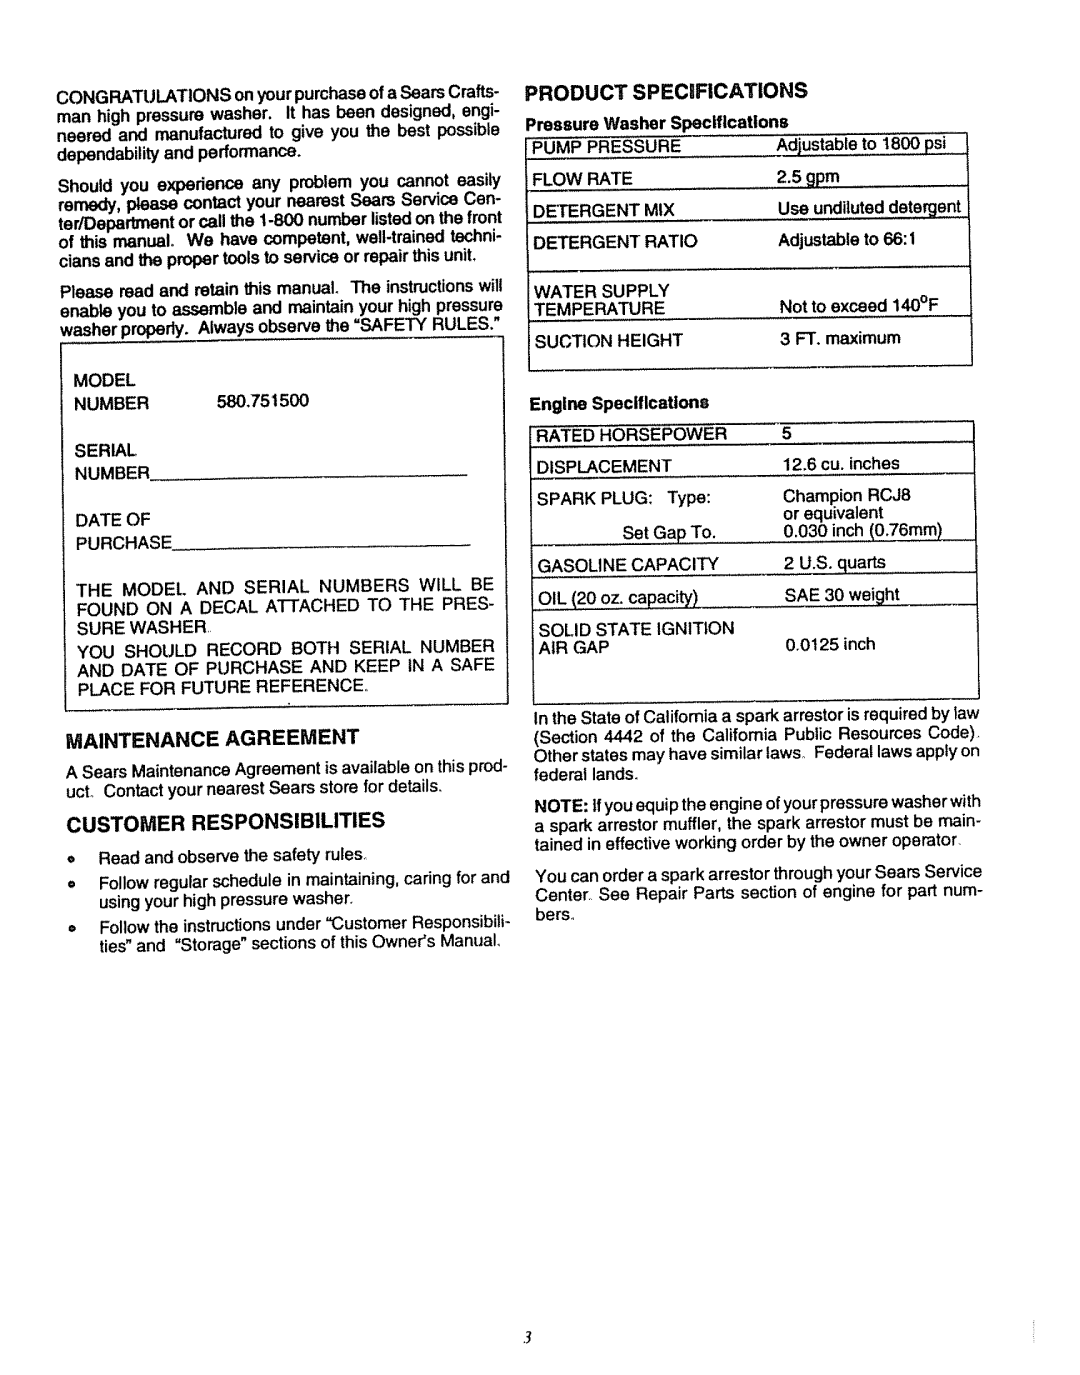 Sears 580.7515 manual Product, S Pecifications, Maintenance Agreement, Customer Responsibilities 